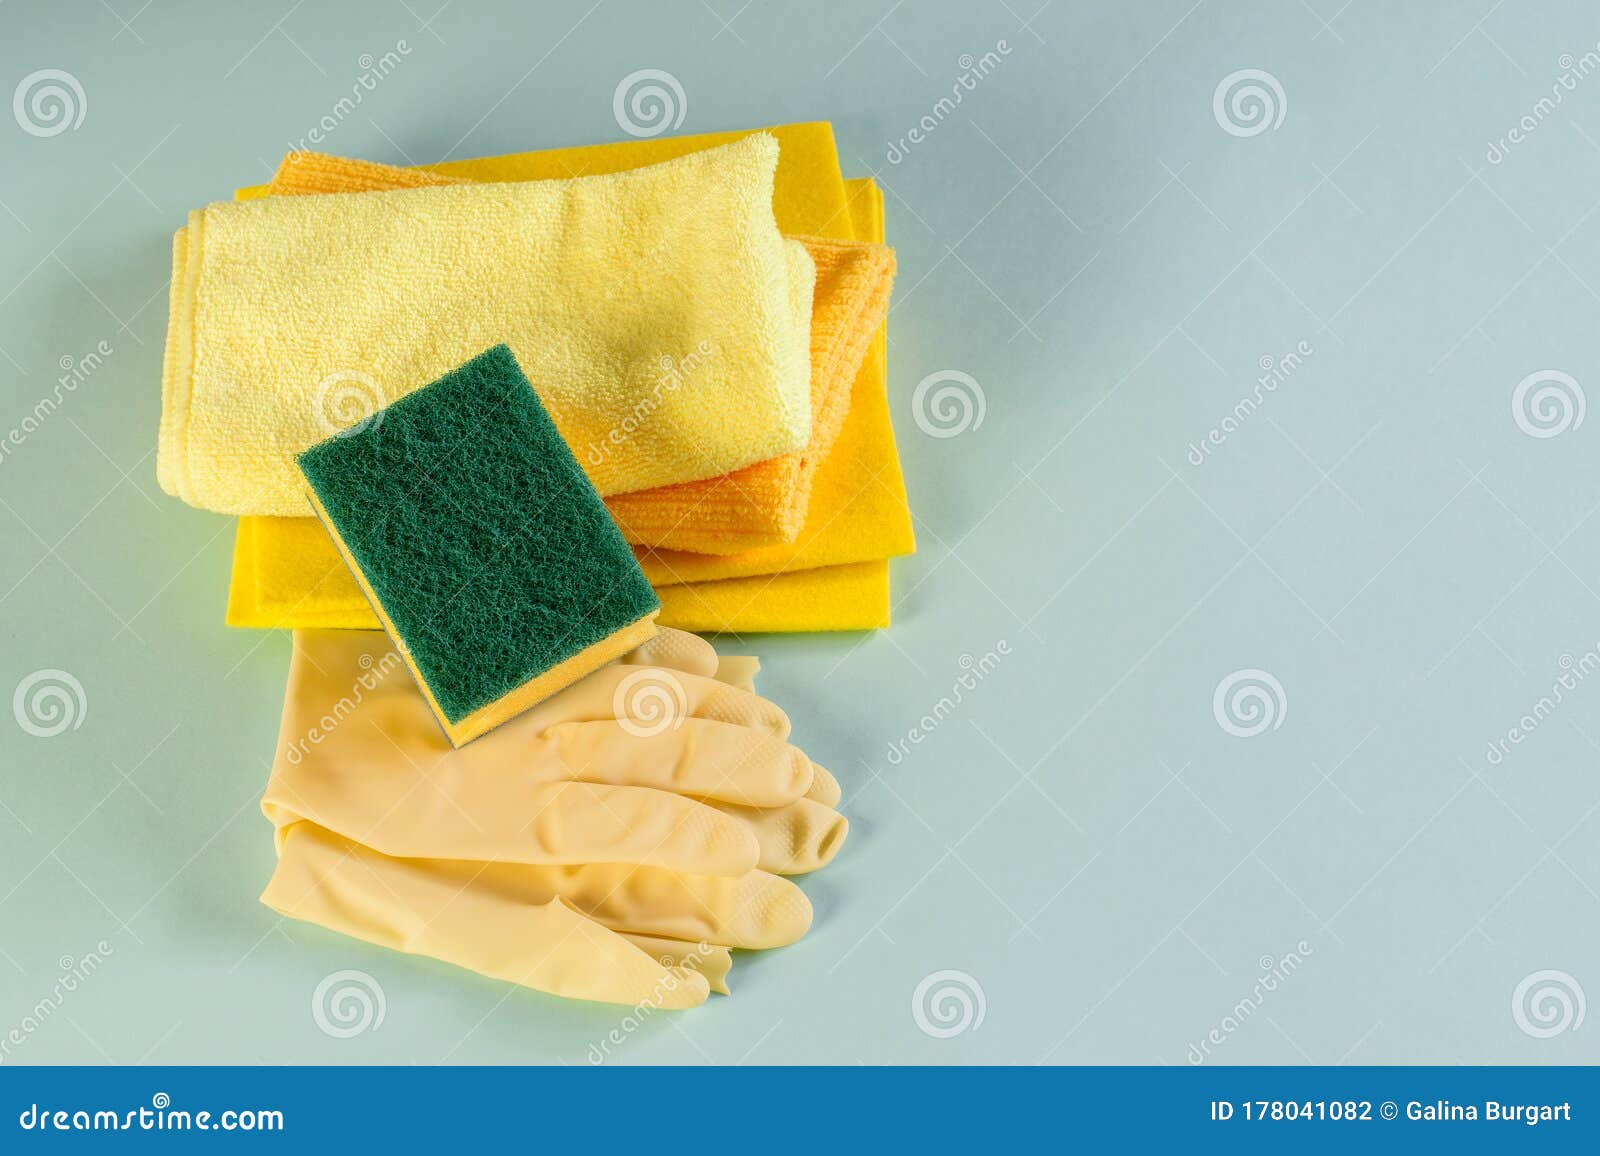 minimum cleaning set for housekeeping. top view, closeup. higiene, house cleaning products